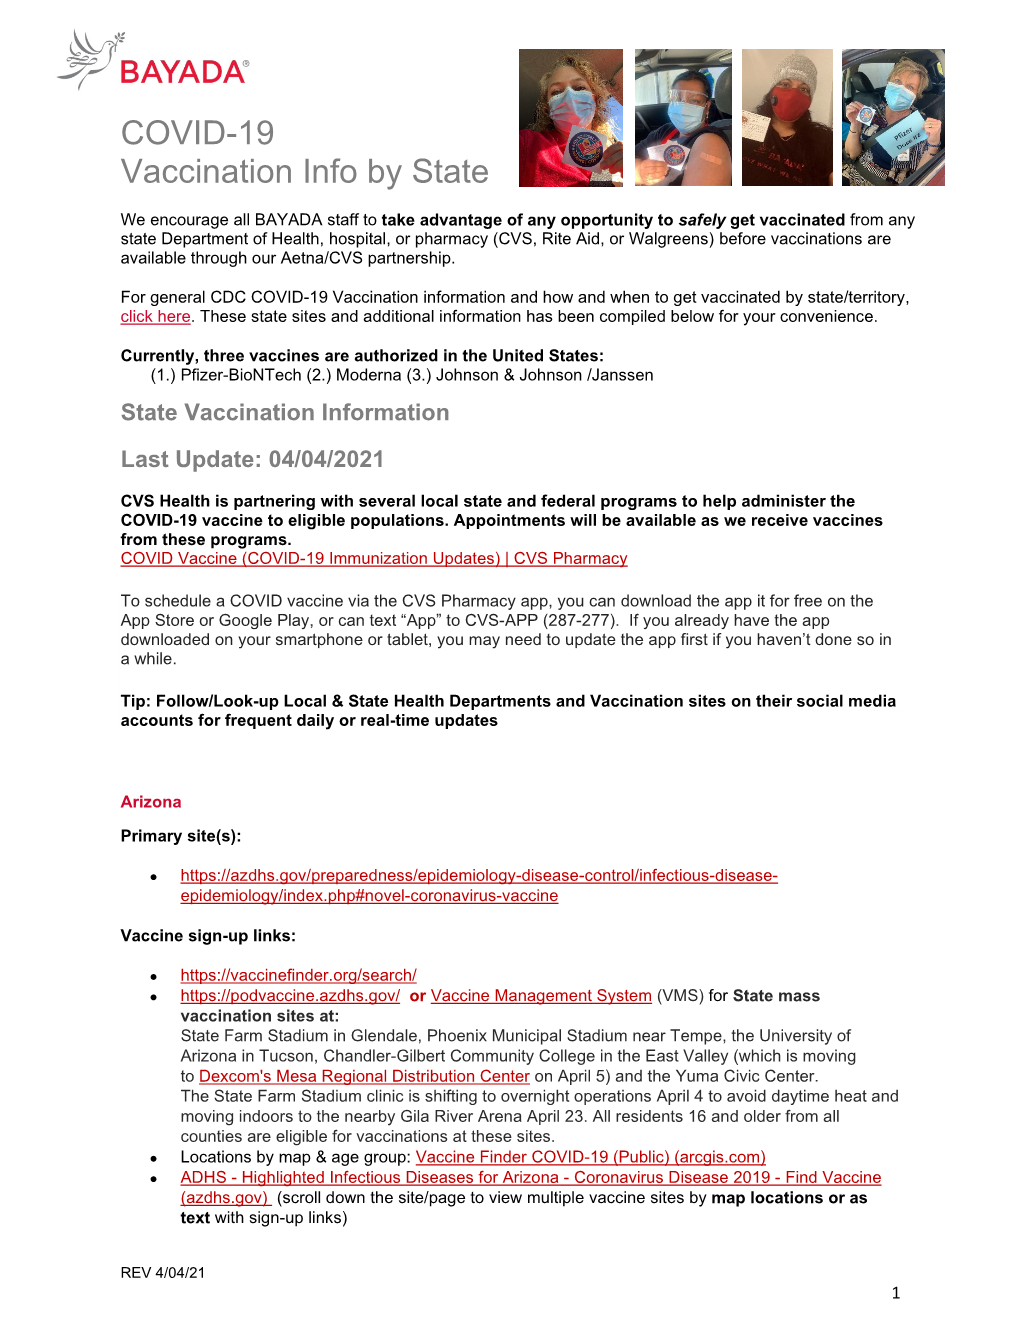 COVID-19 Vaccination Info by State